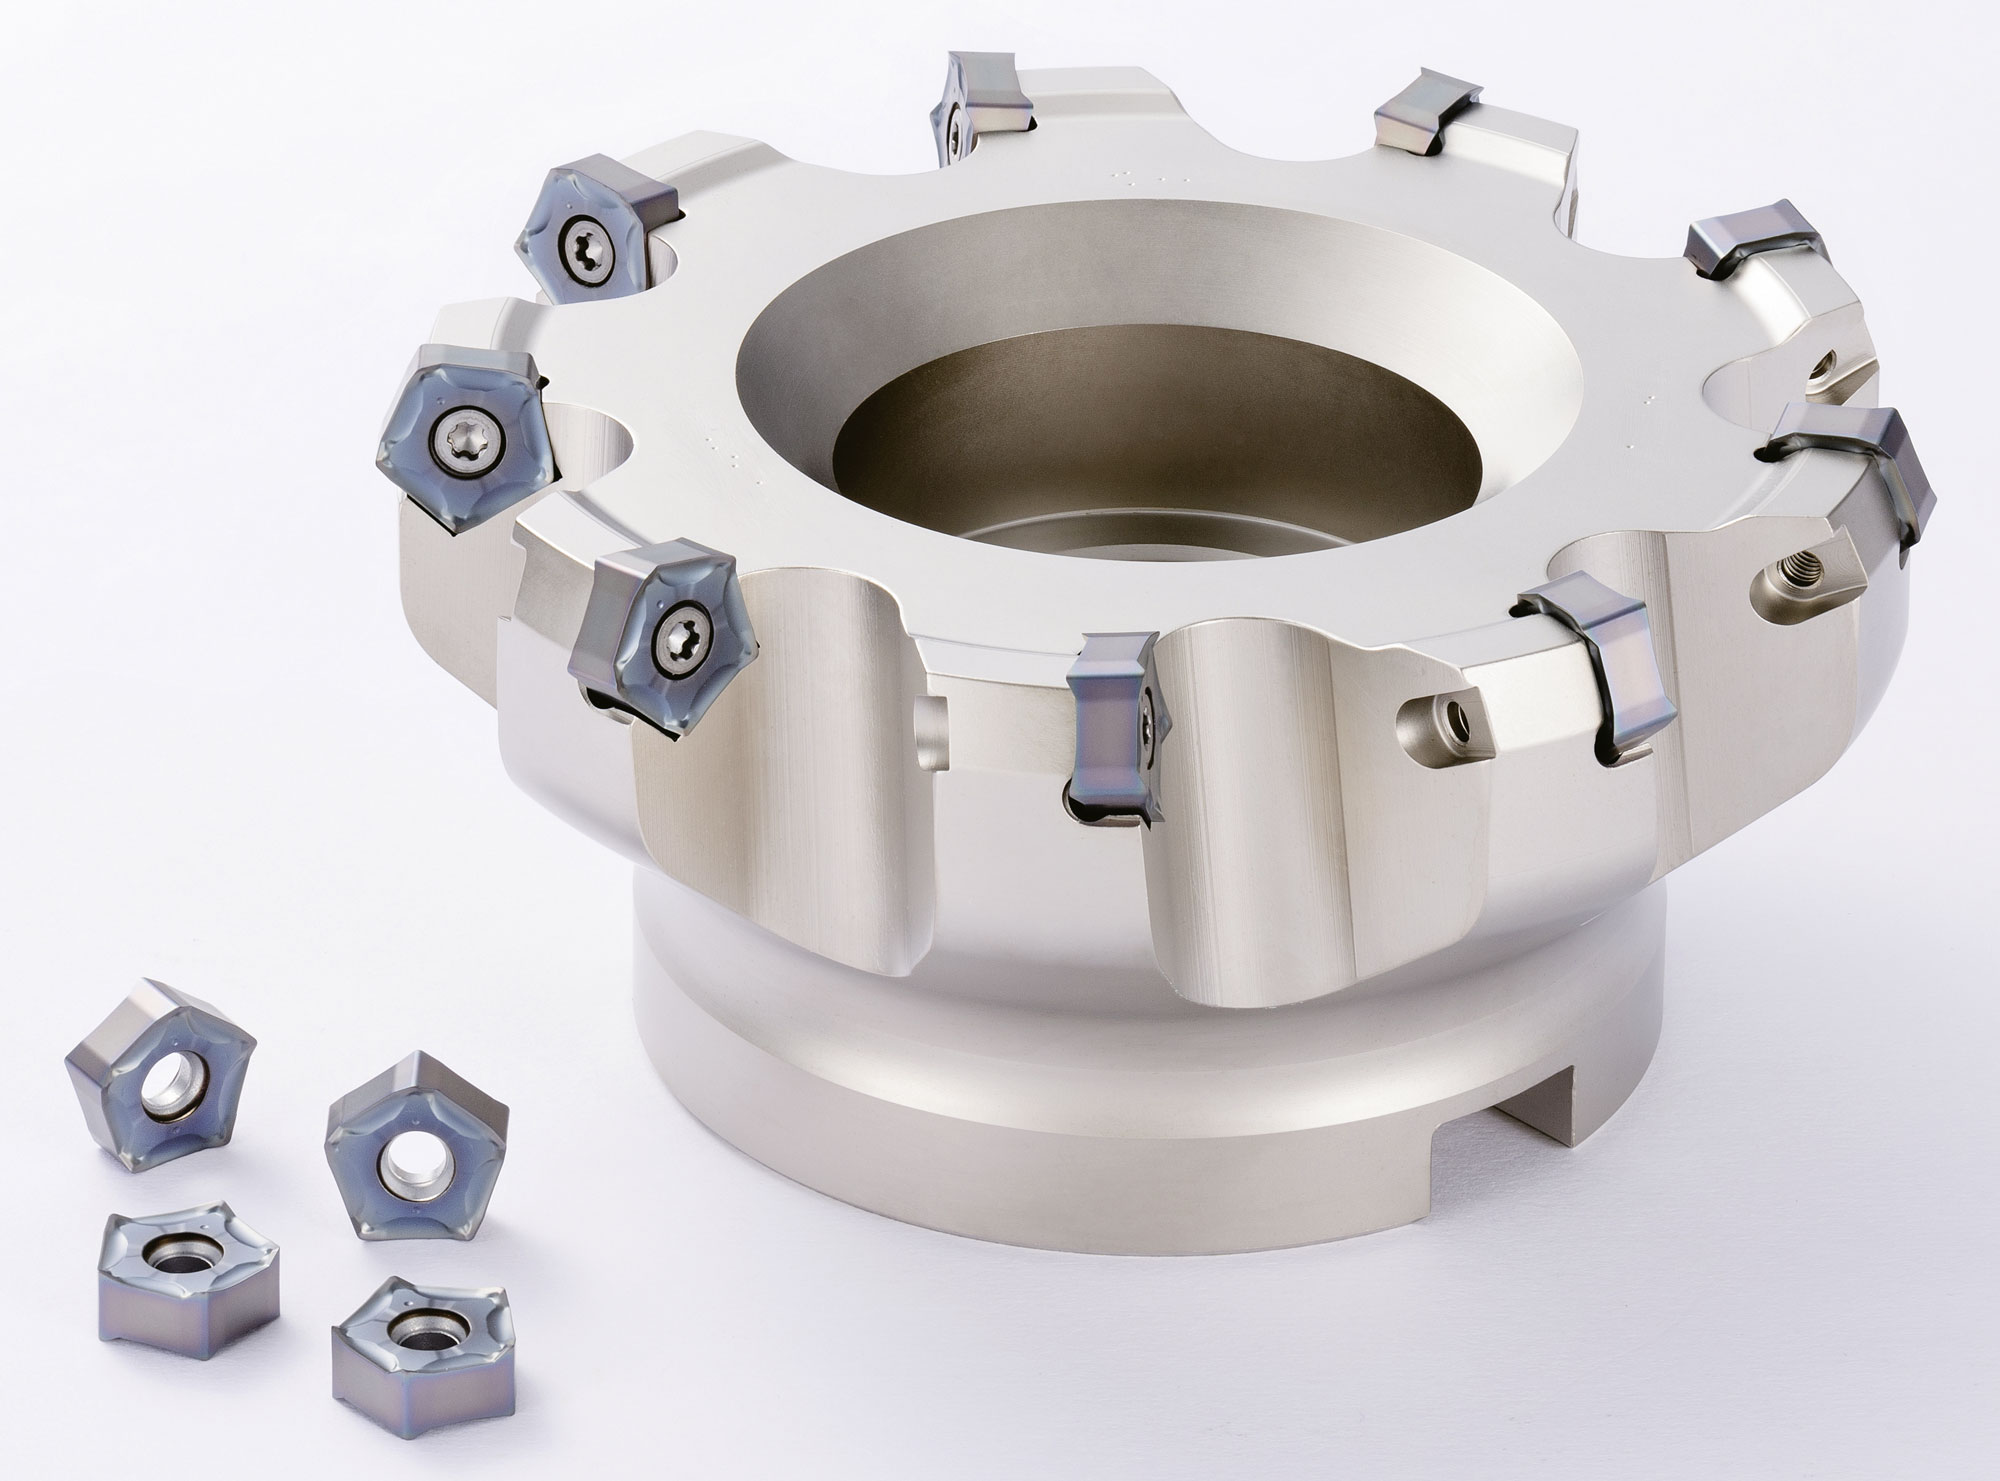 The new MFAH milling cutter for aluminium machining with a hybrid body design and PCD inserts.